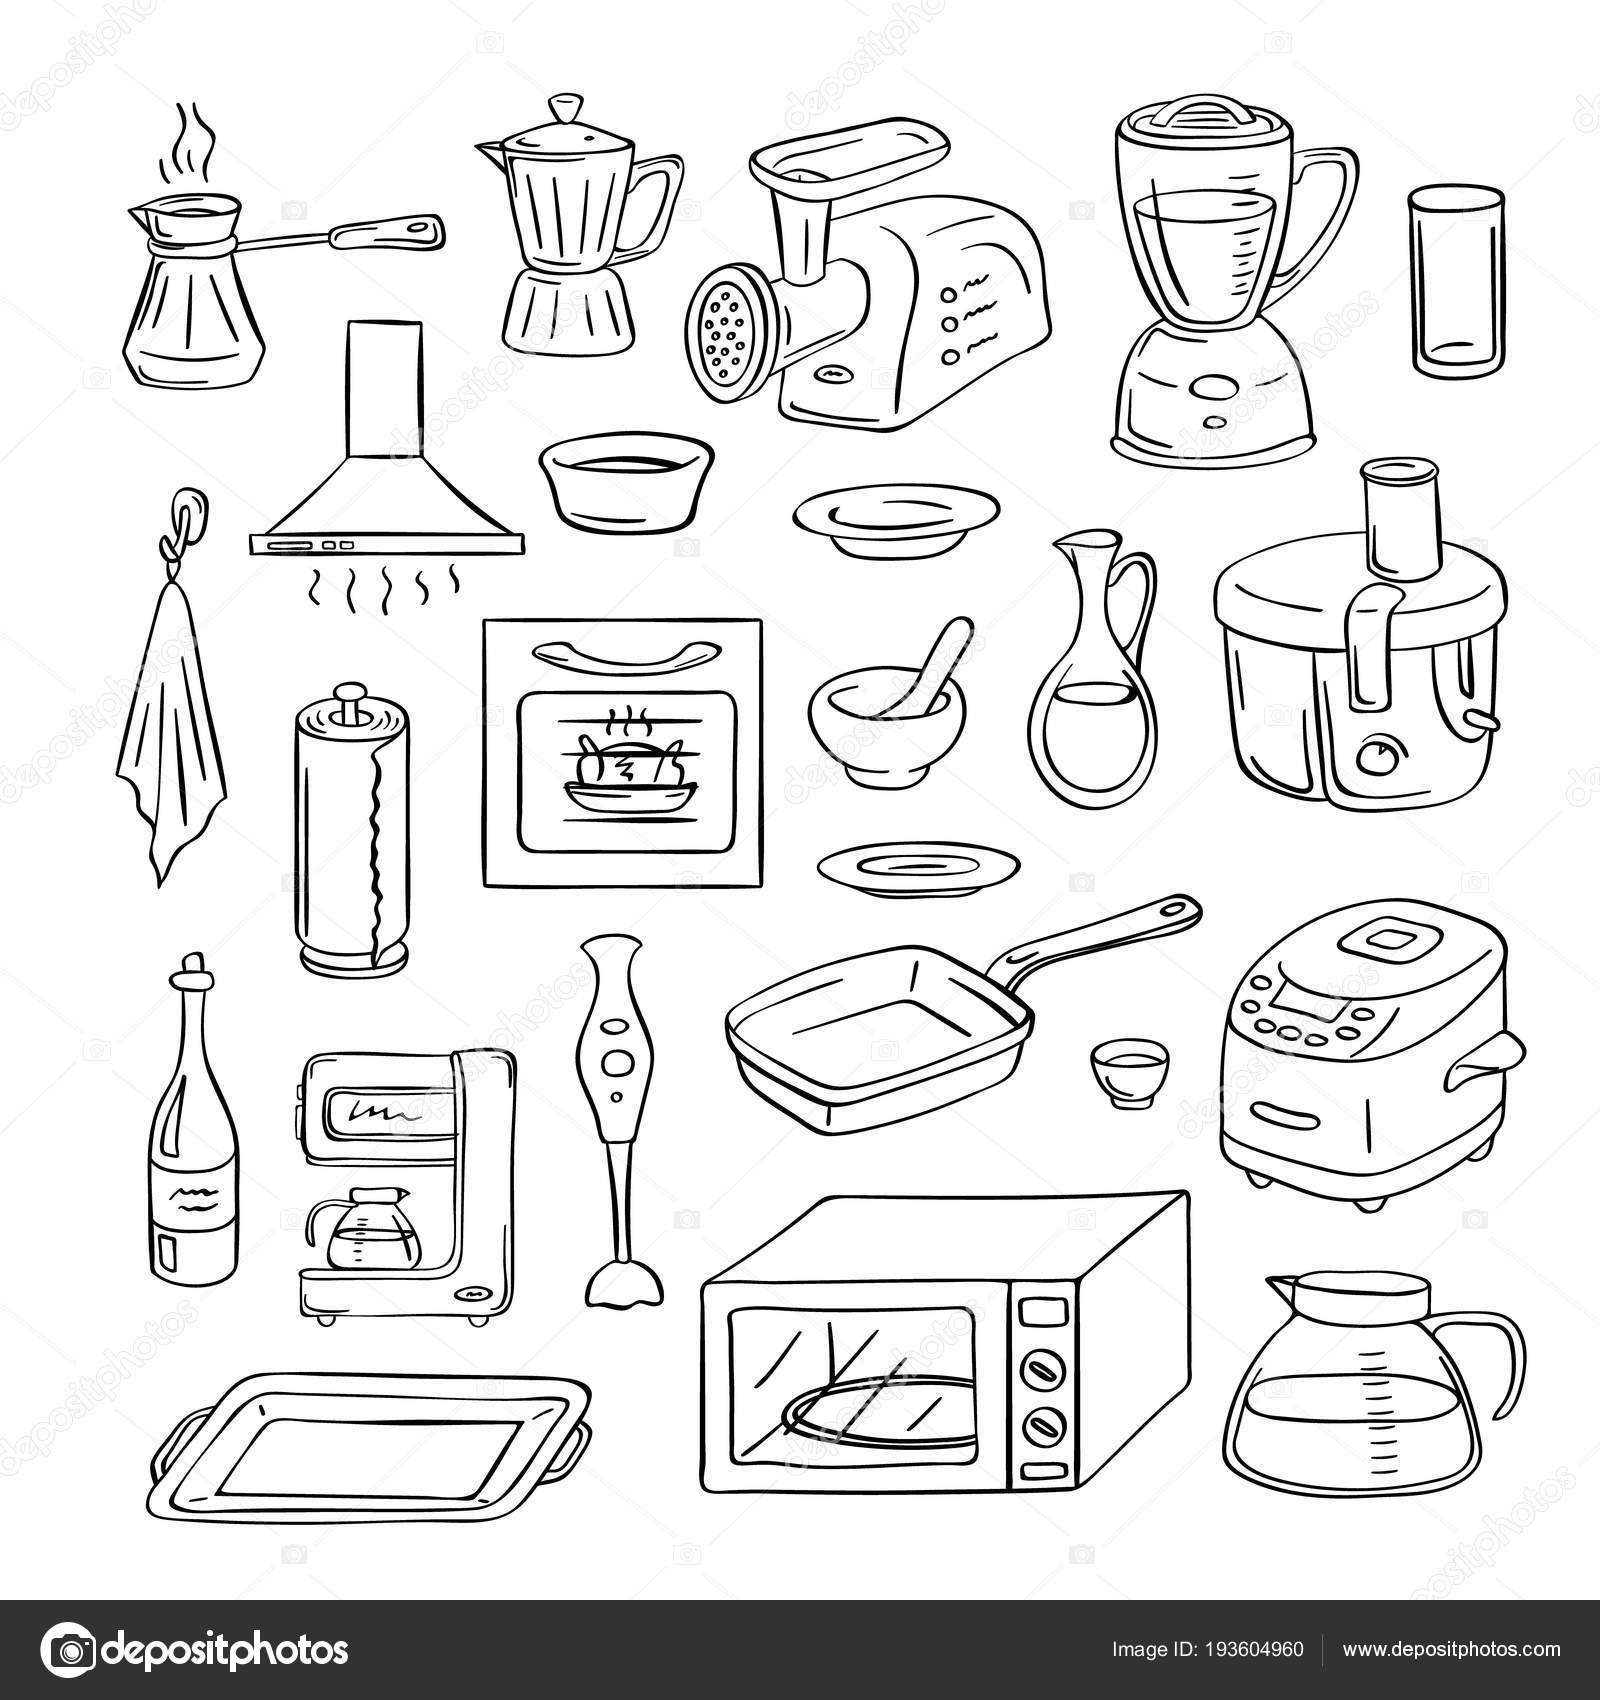 Kitchen tools and appliances. Cute illustration with isolated cooking  objects in vector format. Kitchen utensils collection. Stock Vector